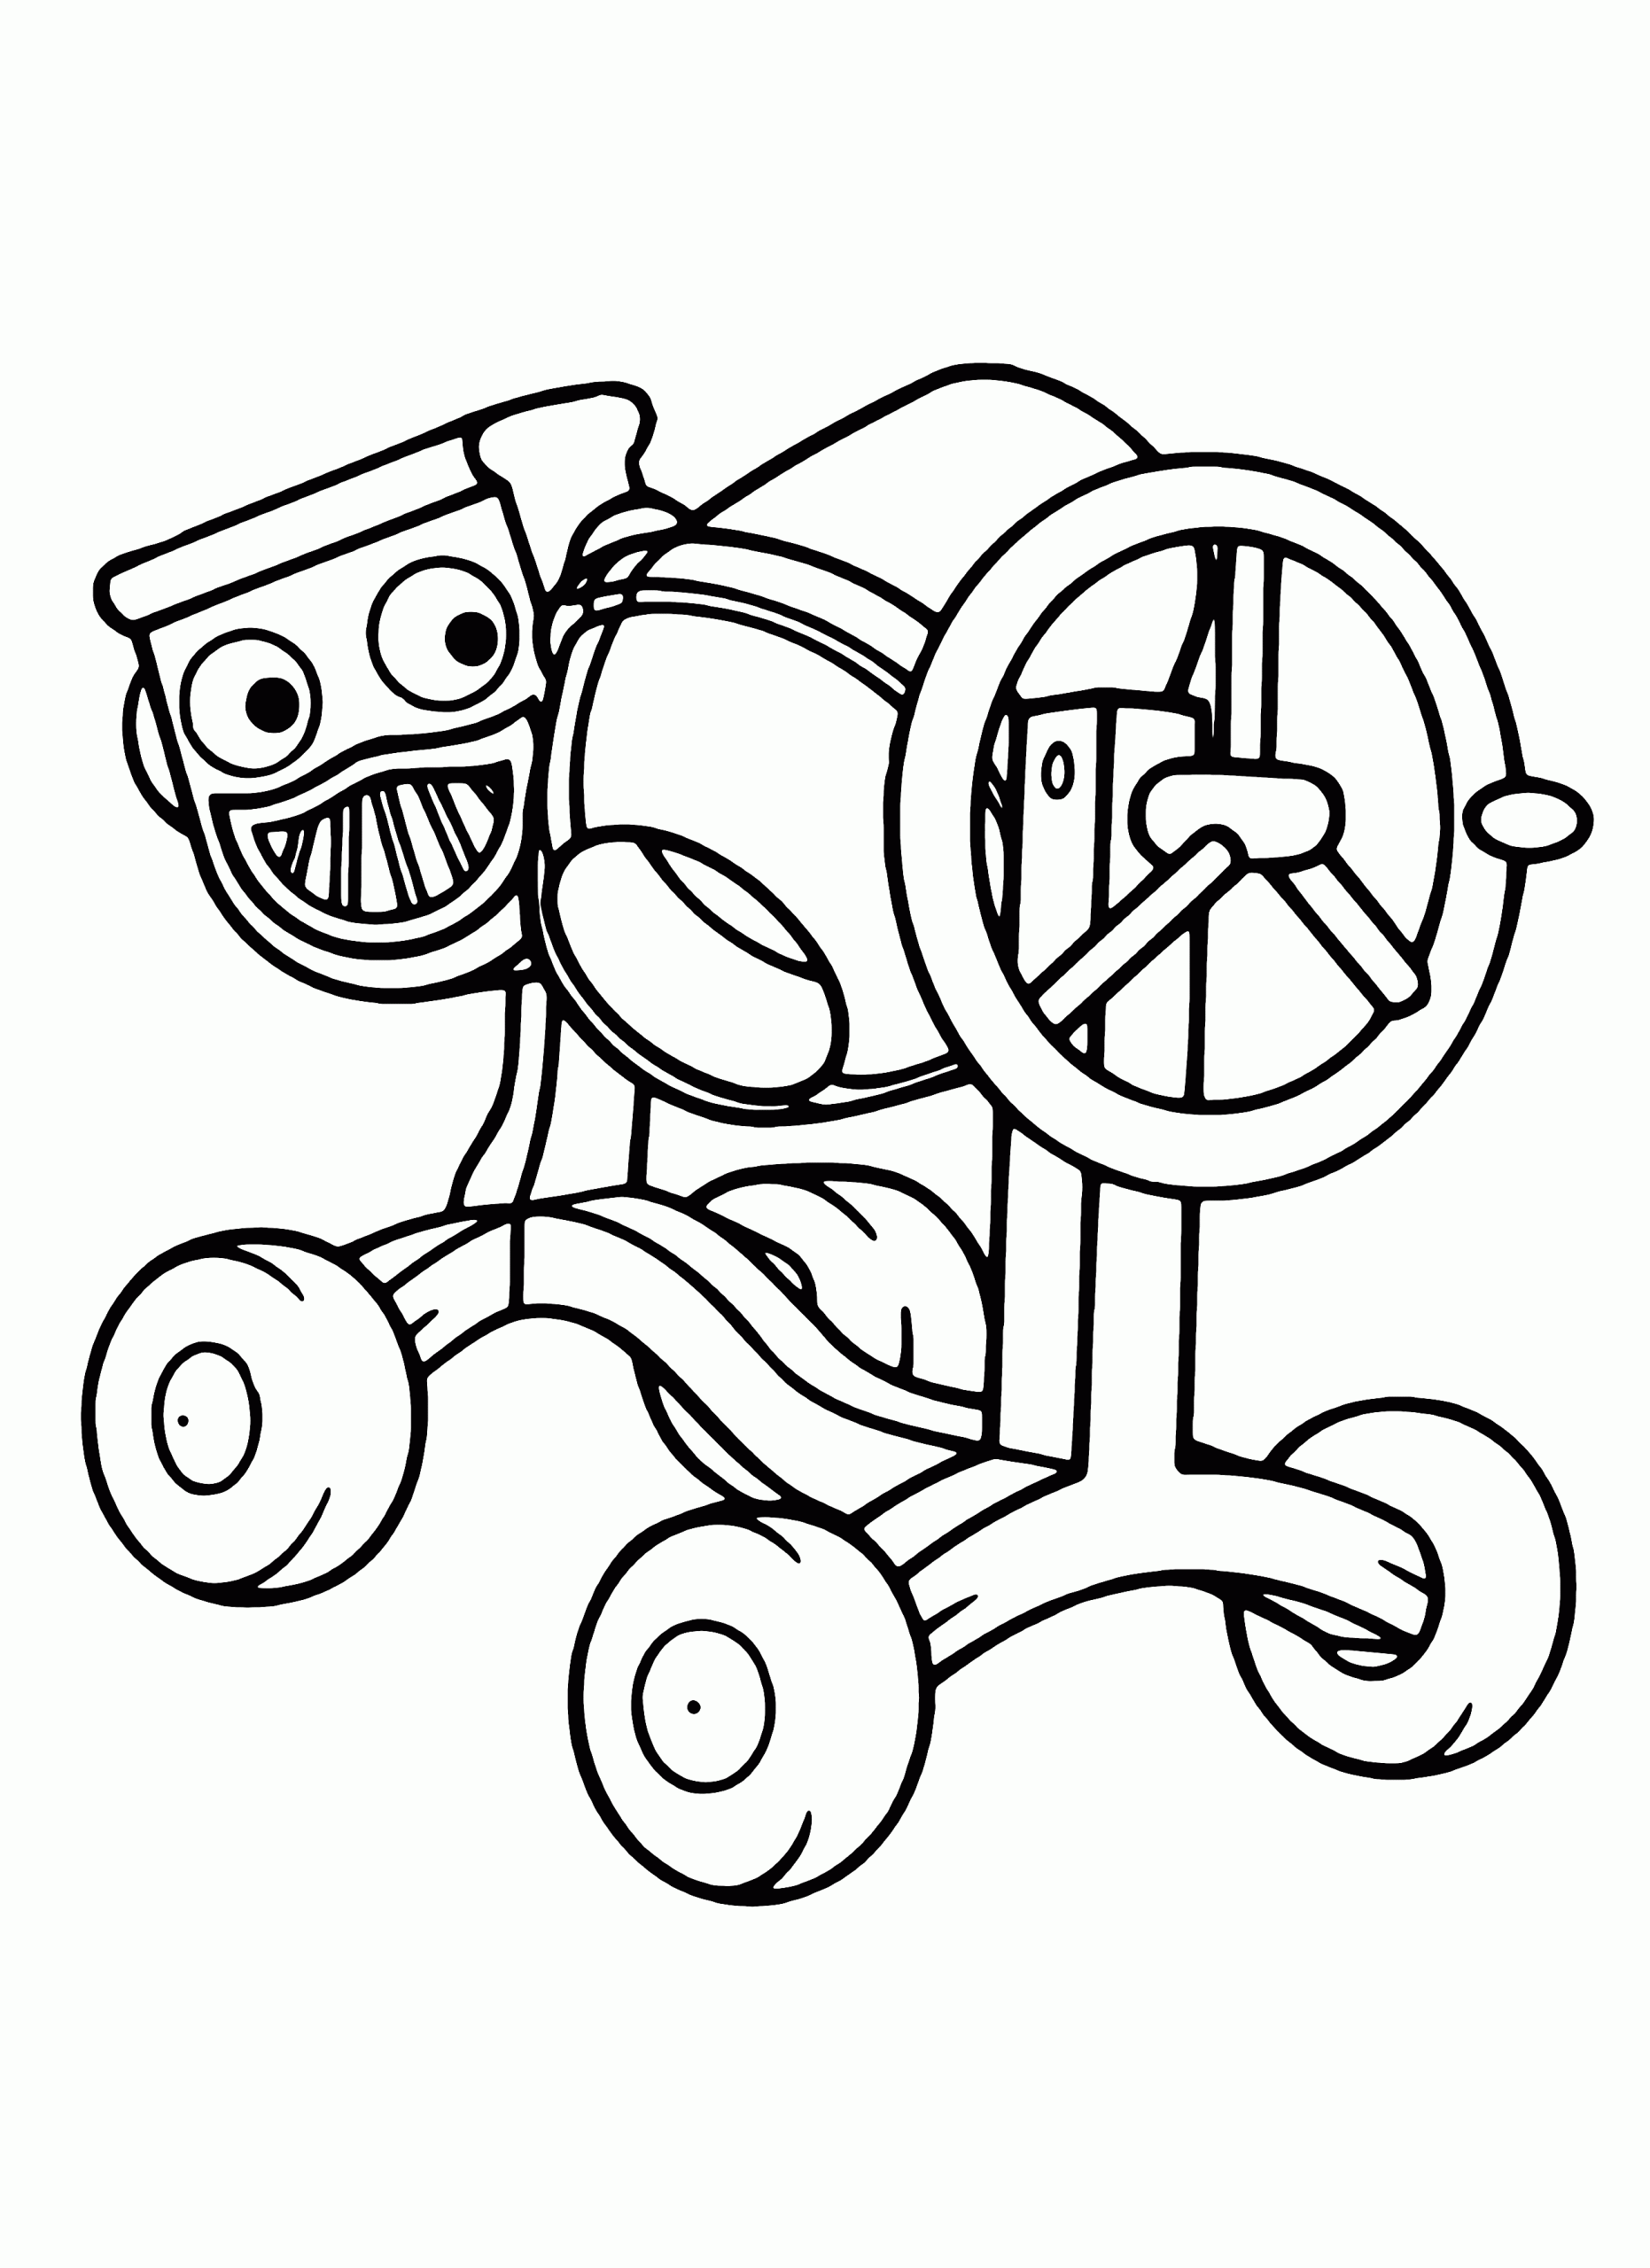 Dizzy the Cement Mixer Bob the Builder Coloring Page